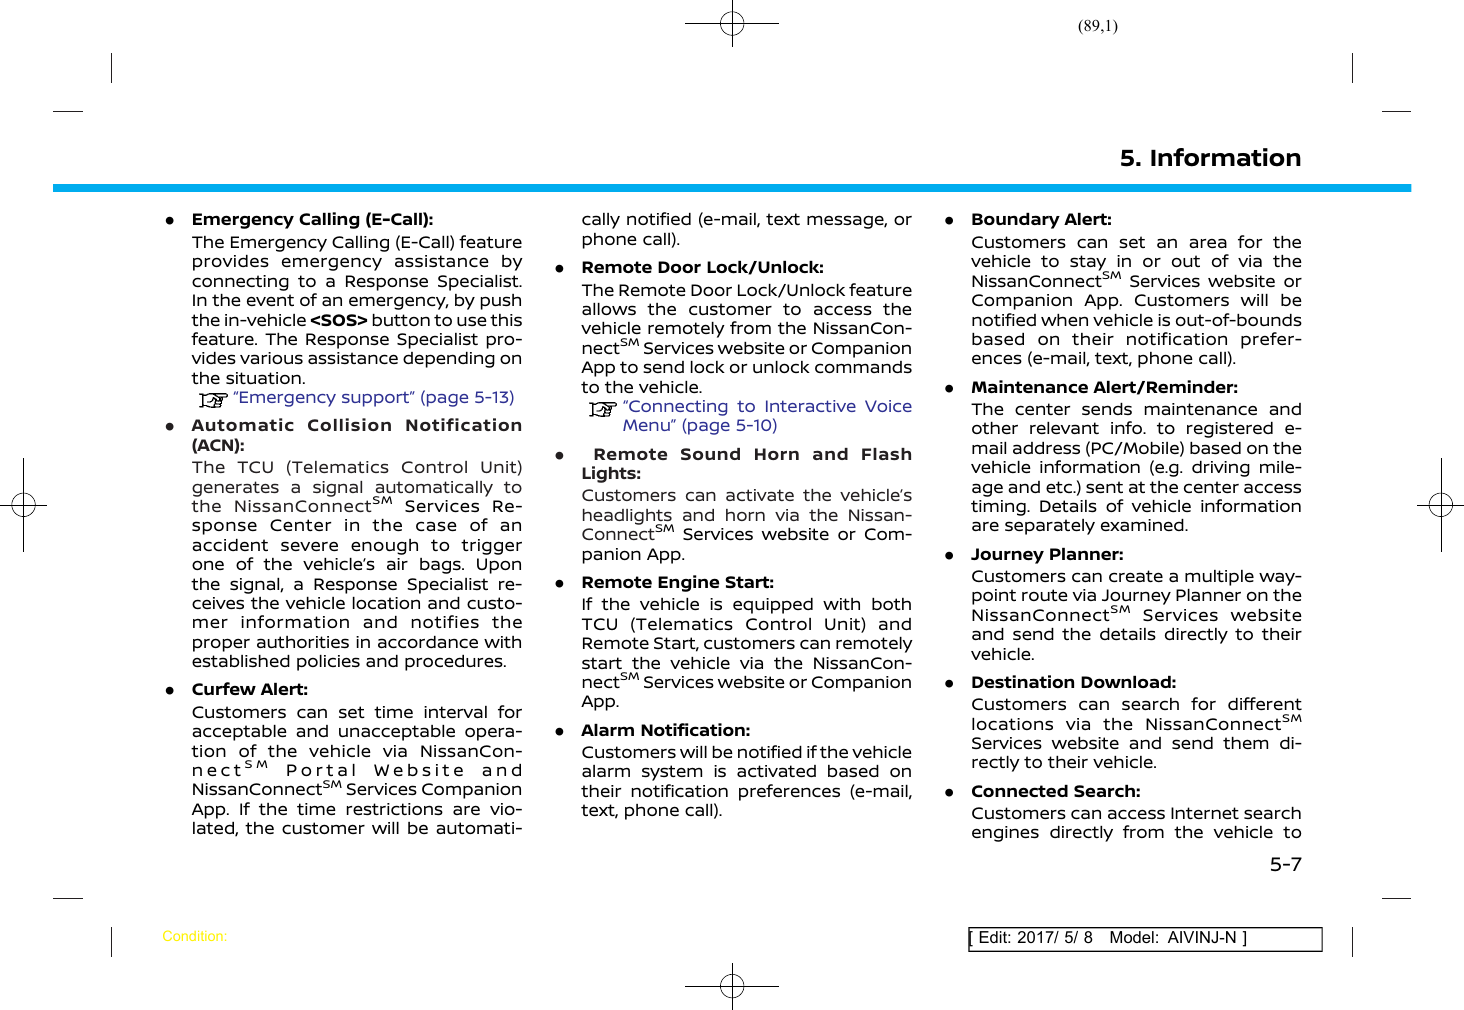 Page 89 of Robert Bosch Car Multimedia AIVICMFB0 Navigation System with Bluetooth and WLAN User Manual